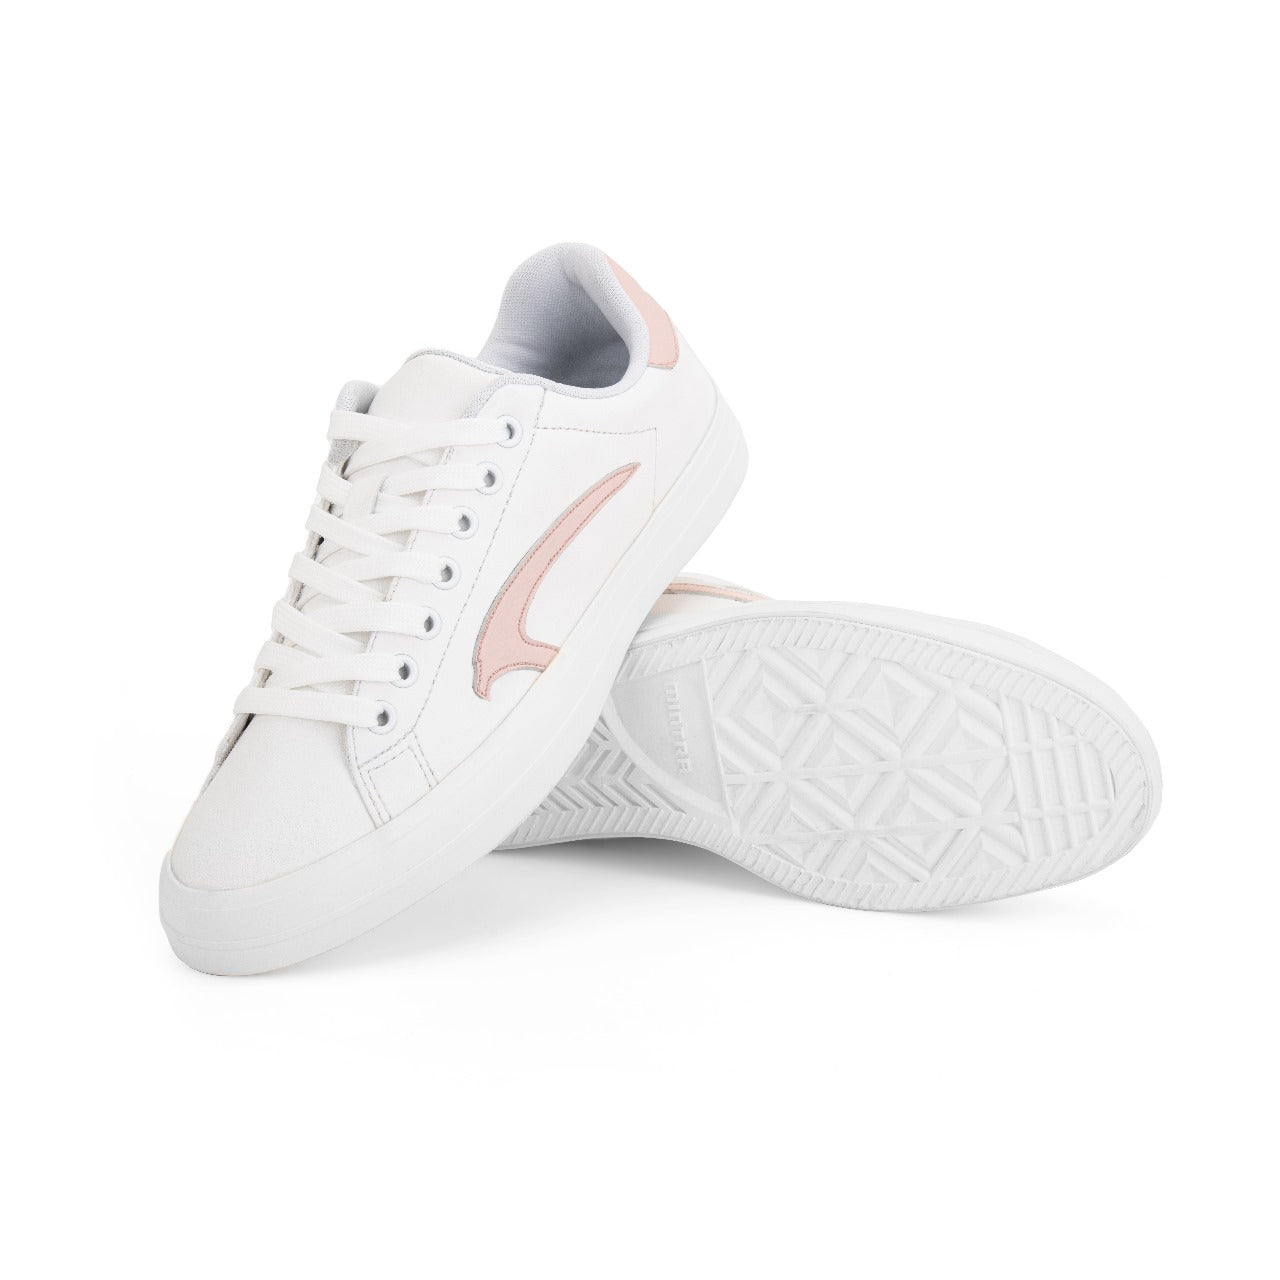 Mintra Urban Shoes For Women, White & Pink